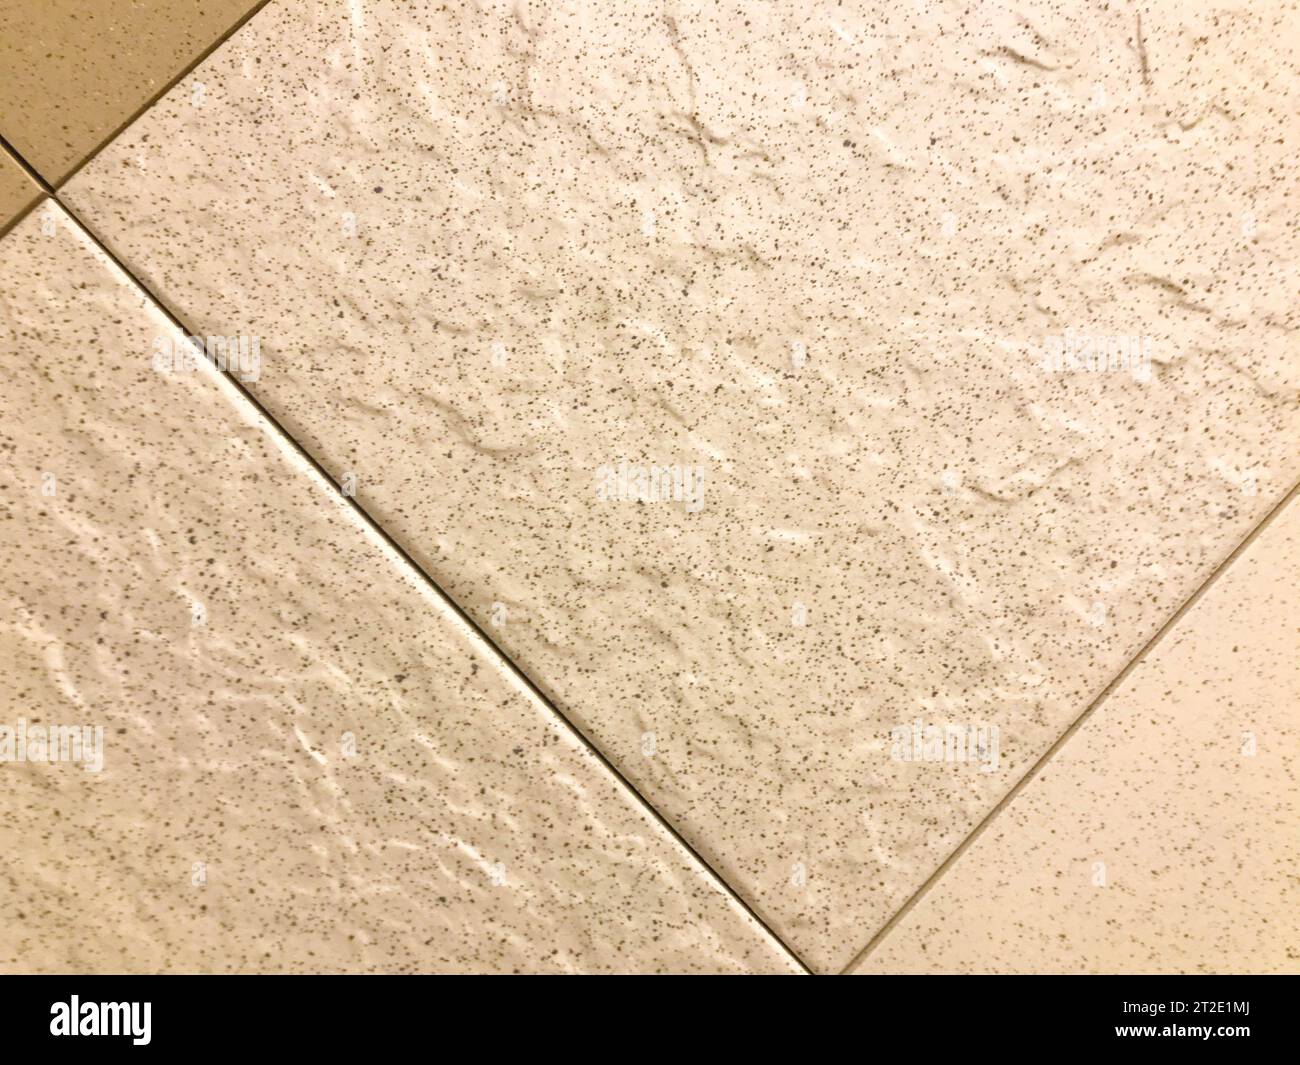 decorative brick for wall covering, texture. white tiled brick, tiled flooring with concrete joints. white floor covering with black spots. Stock Photo